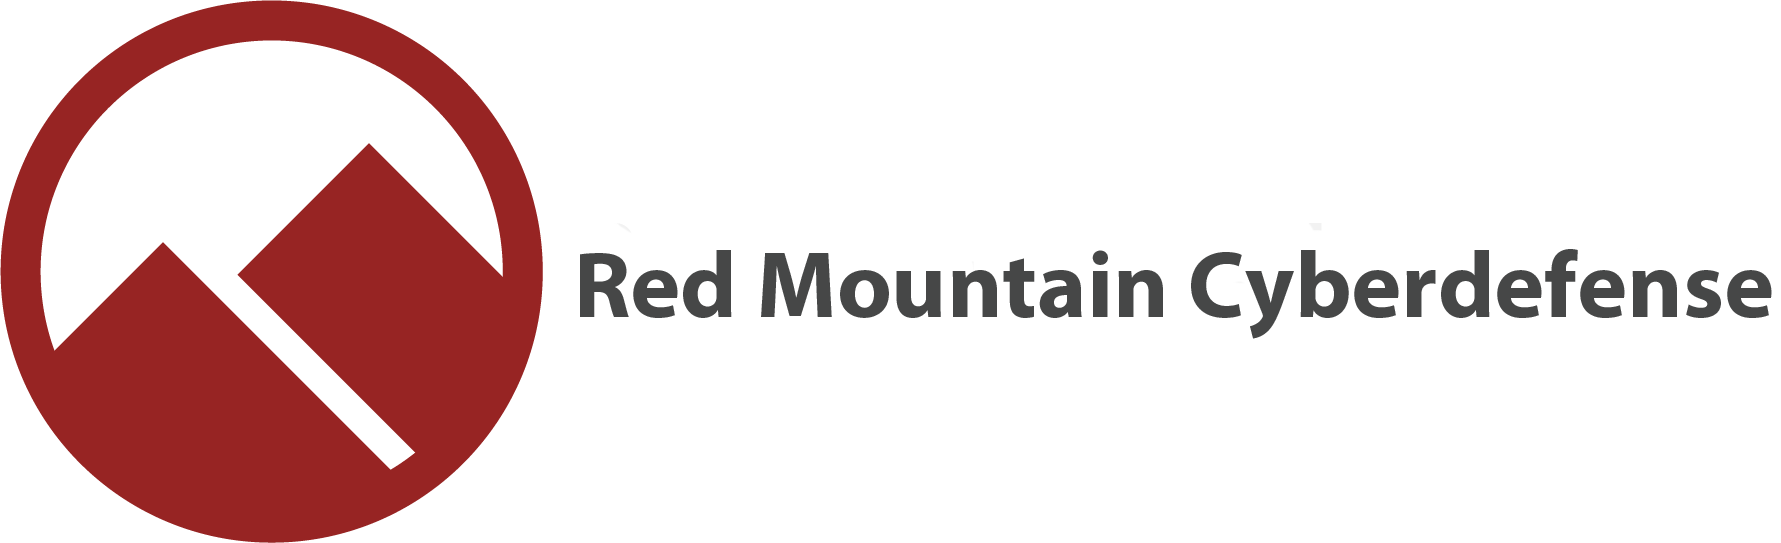 Red MT Logo - mobile security - Red Mountain Cyberdefense